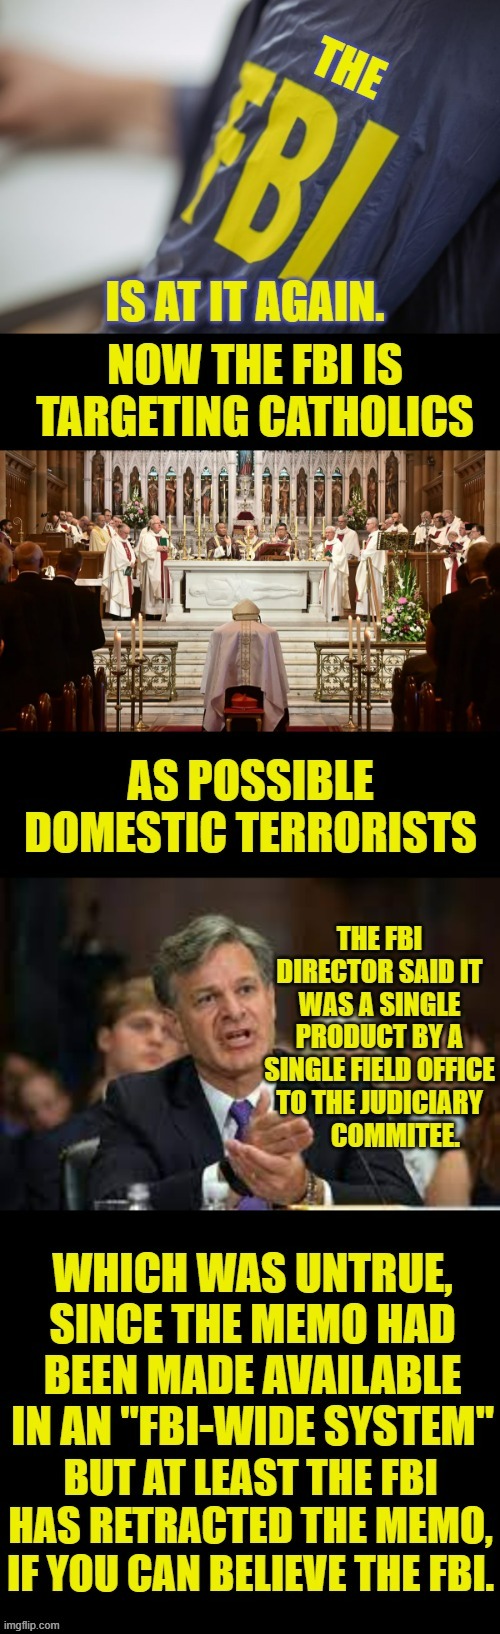 What Do You Know...Parents At School Board Meetings Wasn't Enough... | image tagged in memes,fbi,catholic church,target,terrorists,investigation | made w/ Imgflip meme maker